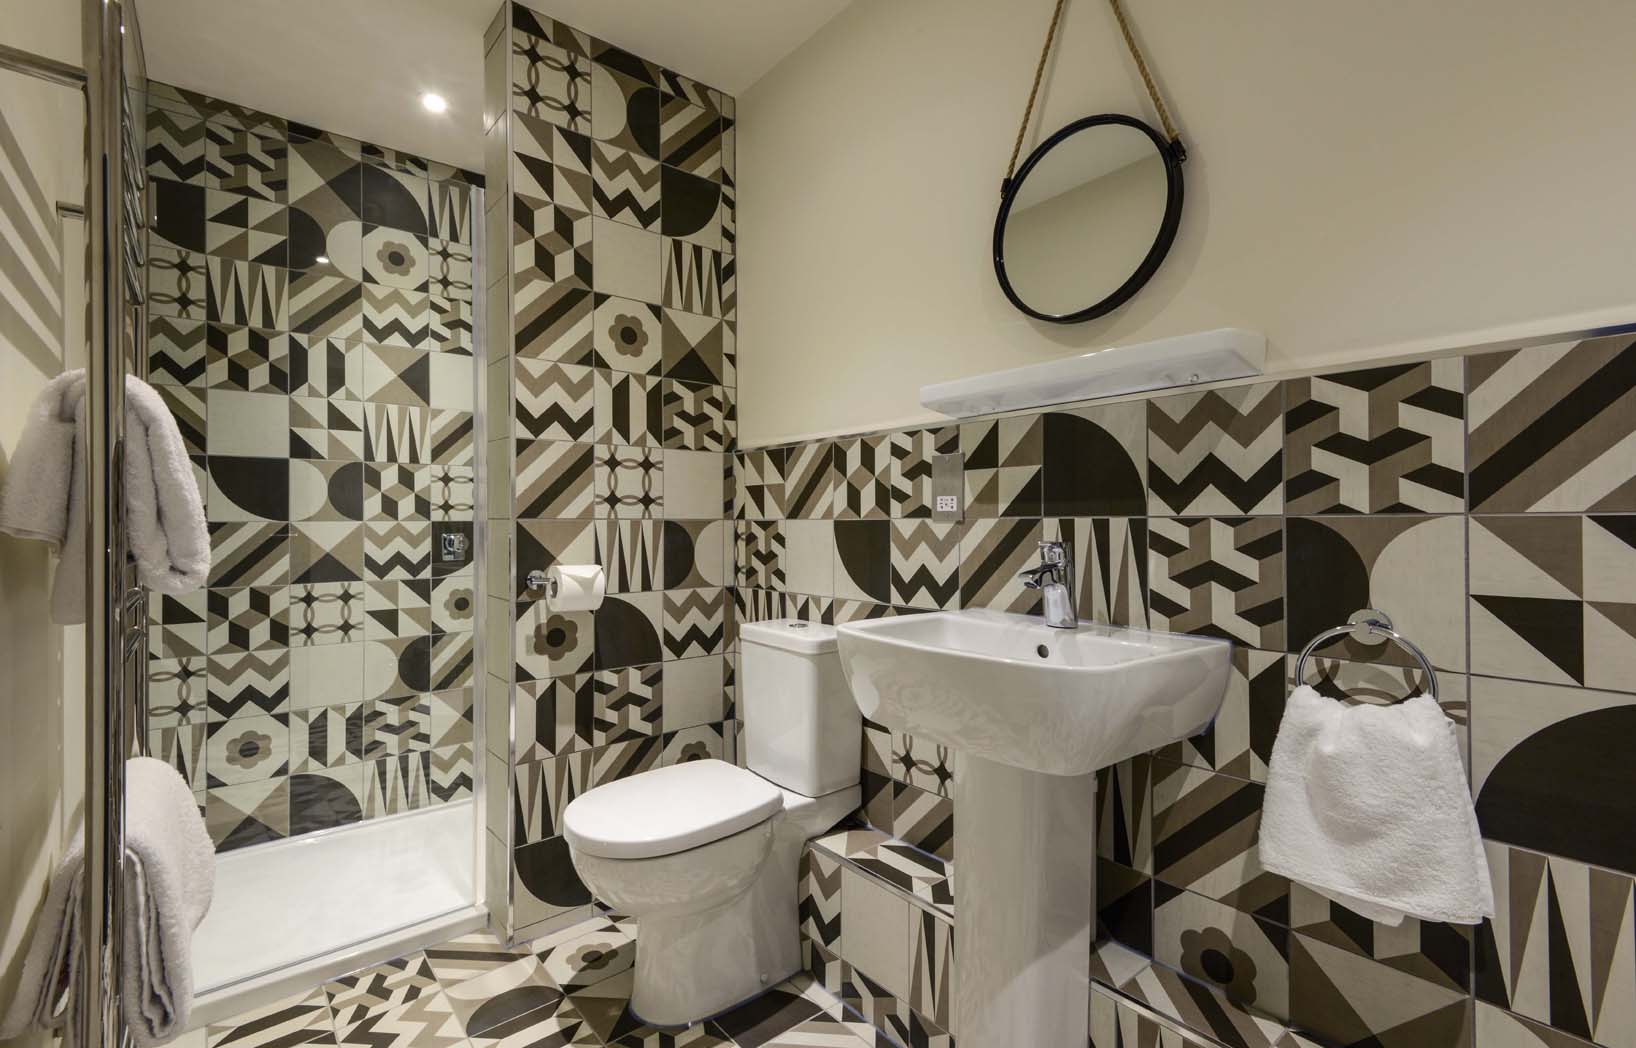 Watery Coombe - Romantic room with ensuite shower room adorned with black and white tiles